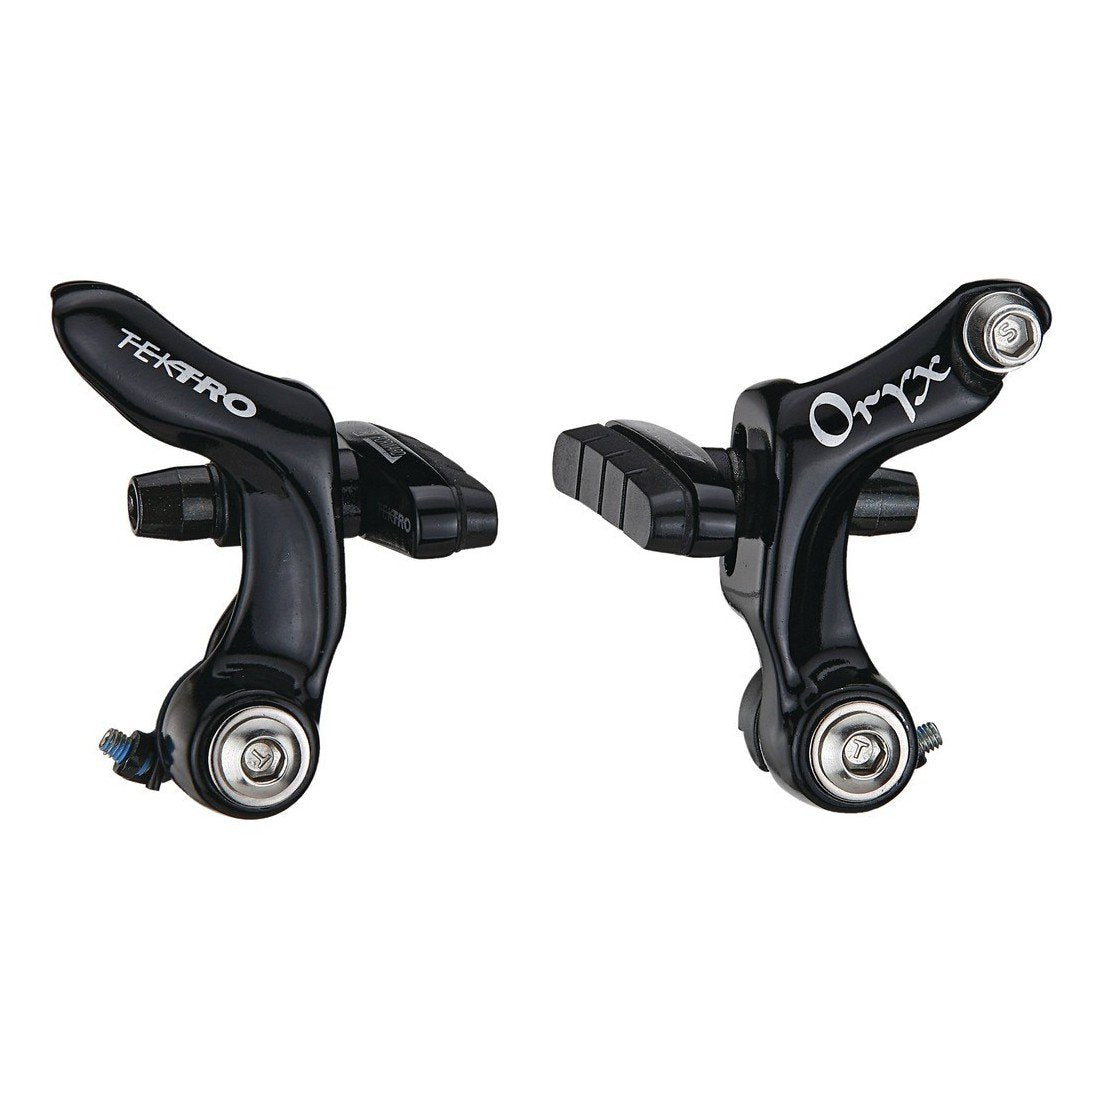 Tektro 992A Cantilever Brake - Adjustable Pads & Link Wire